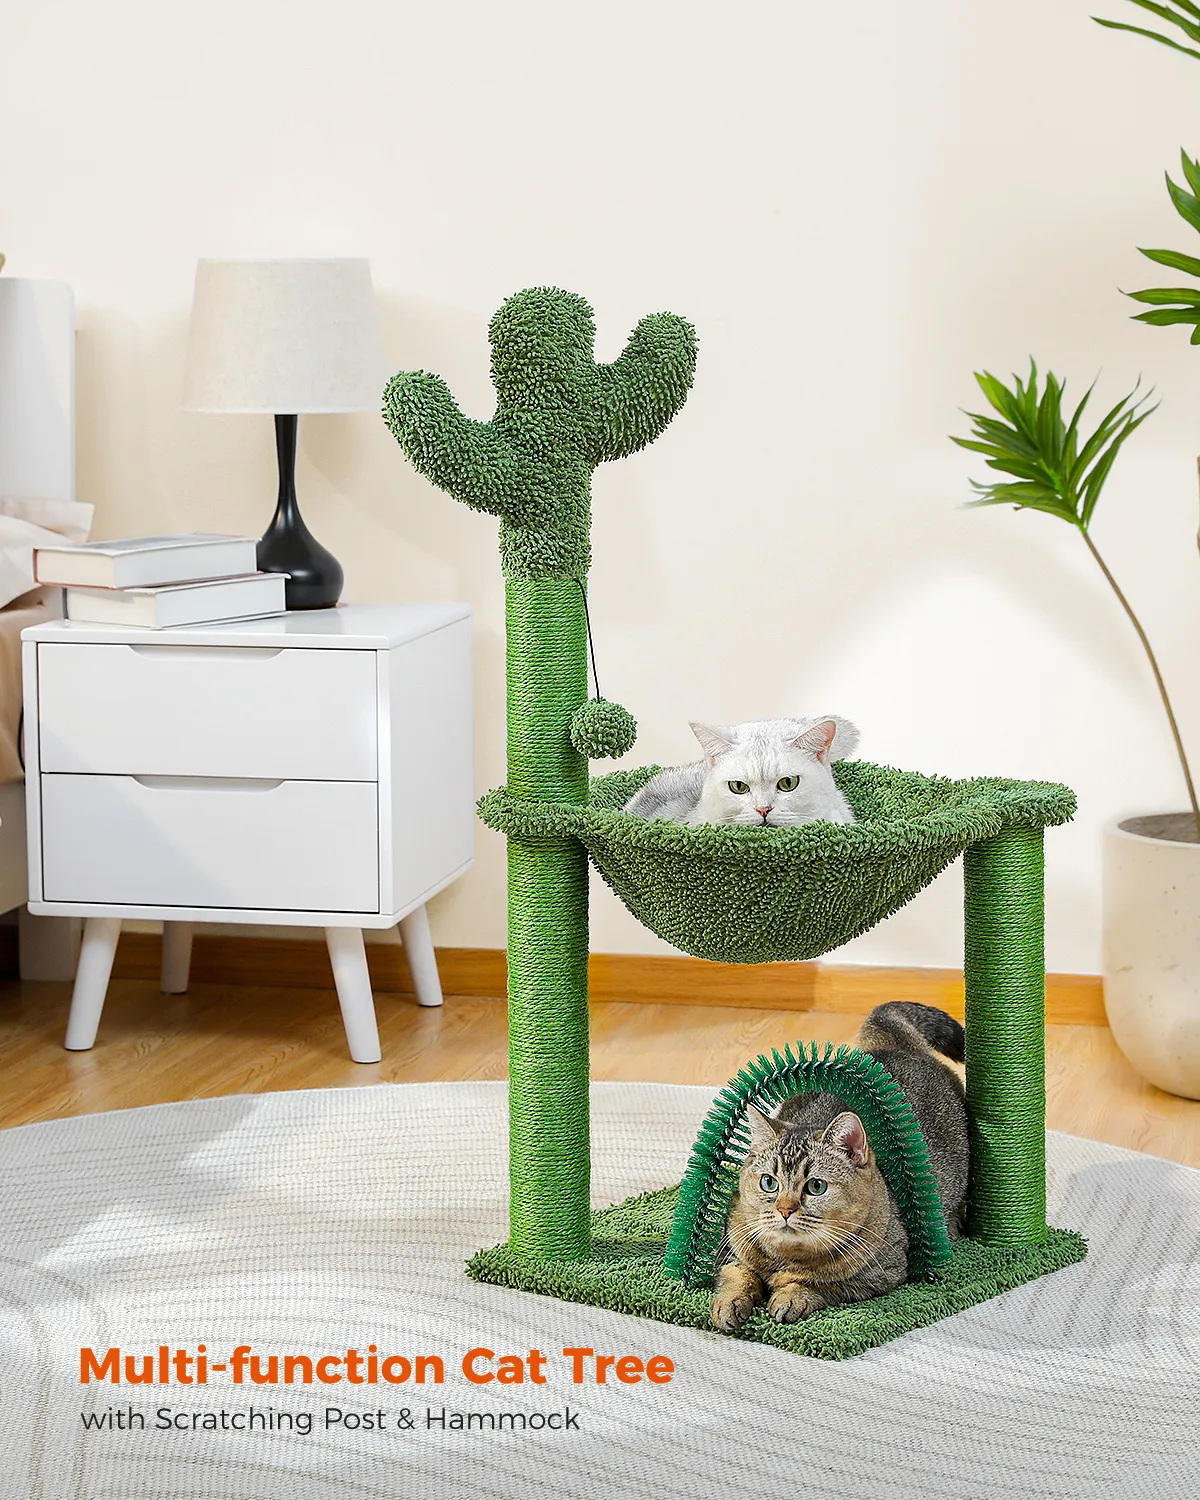 H84CM Small Cactus Cat Tree Tower for Indoor Cozy Hammock Scratching Post Self Groomer for Kitty Durable Stable Large Perch Ball